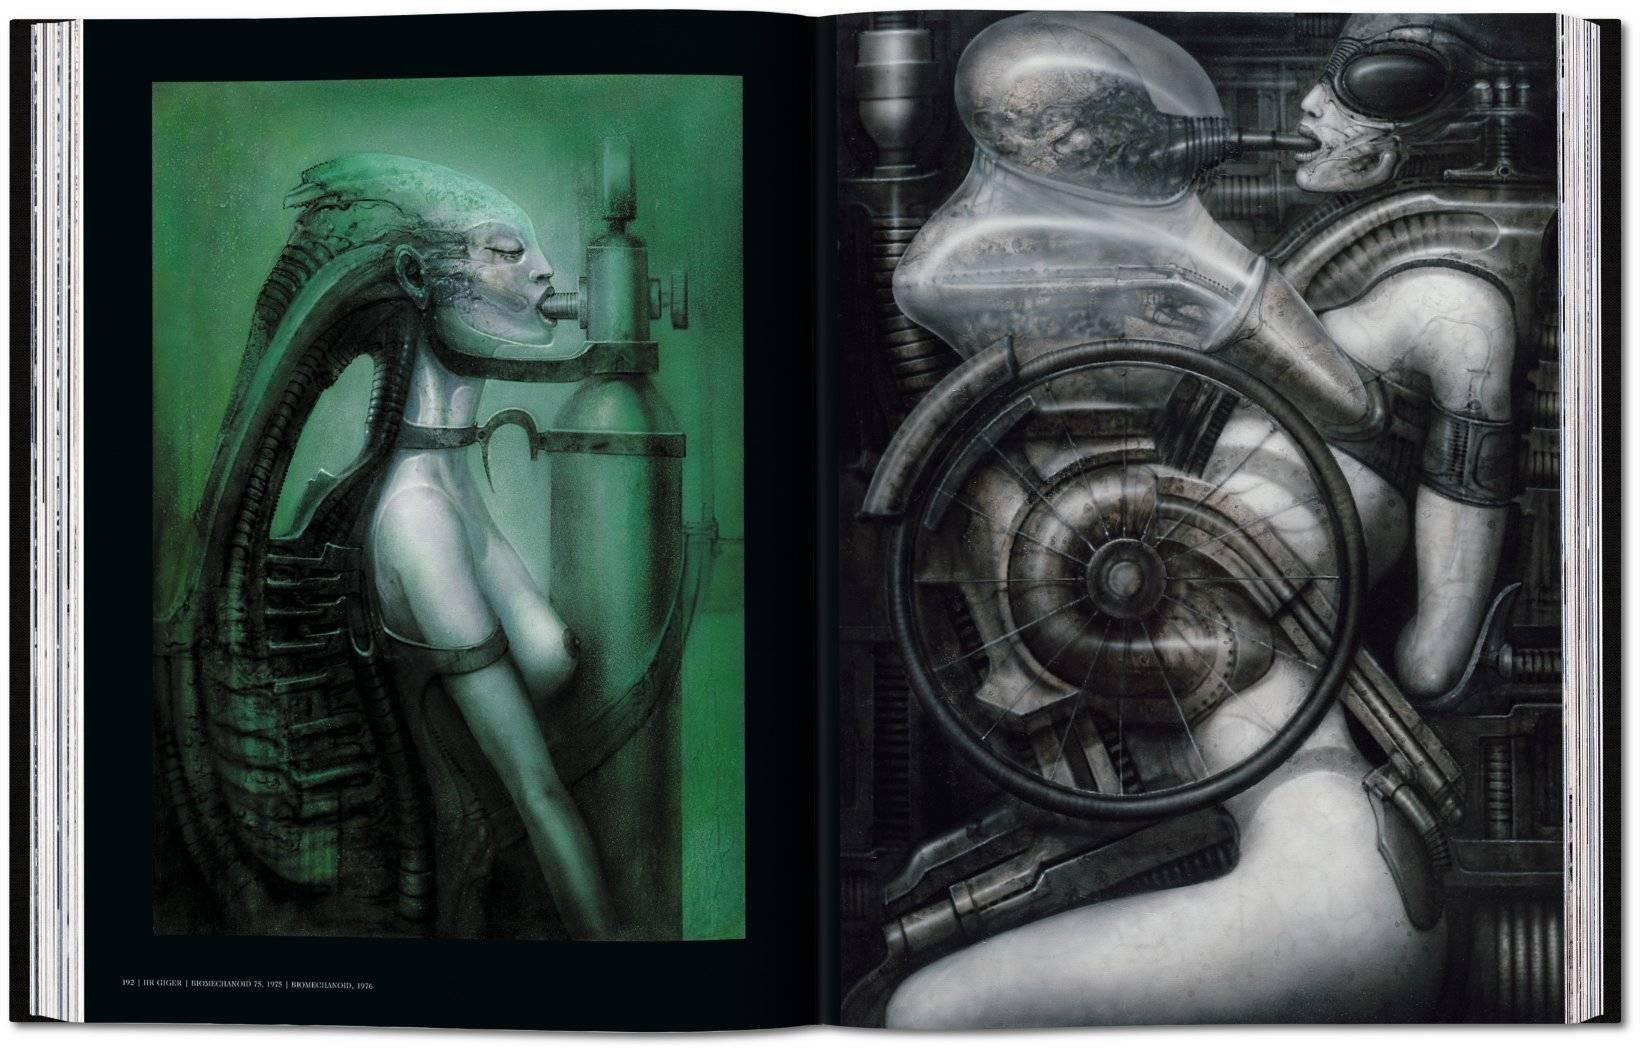 Other HR Giger, Art Edition Nr. 101–200 ‘Relief’